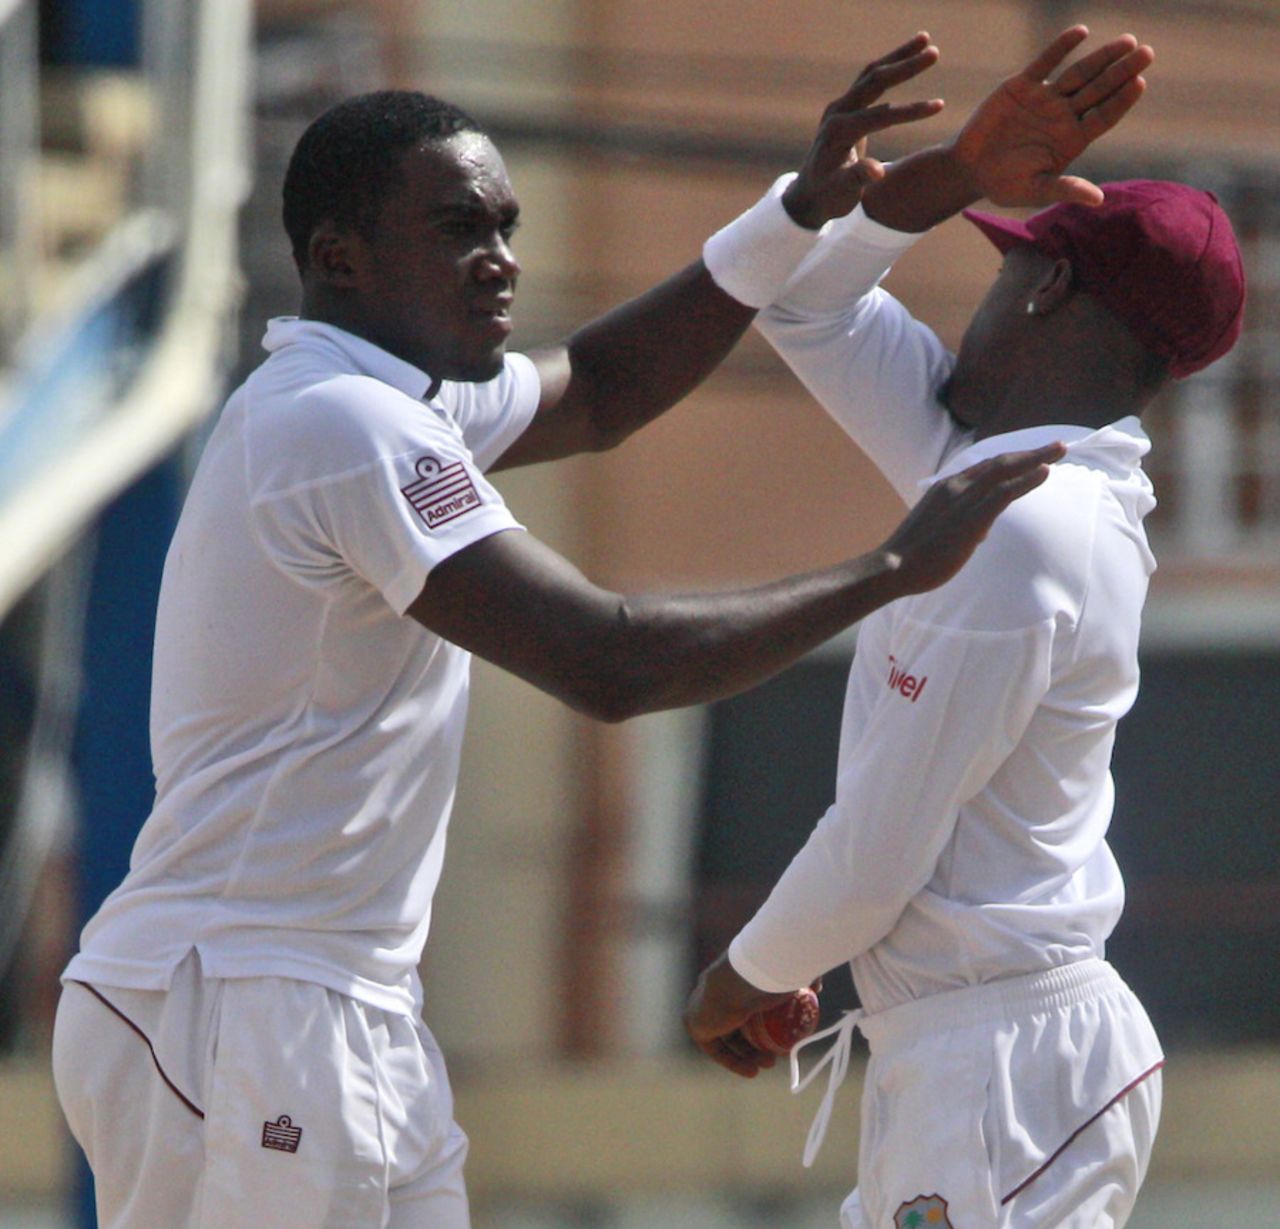 Jerome Taylor celebrates the wicket of Brendon McCullum, West Indies v New Zealand, 2nd Test, Trinidad, 3rd day, June 18, 2014